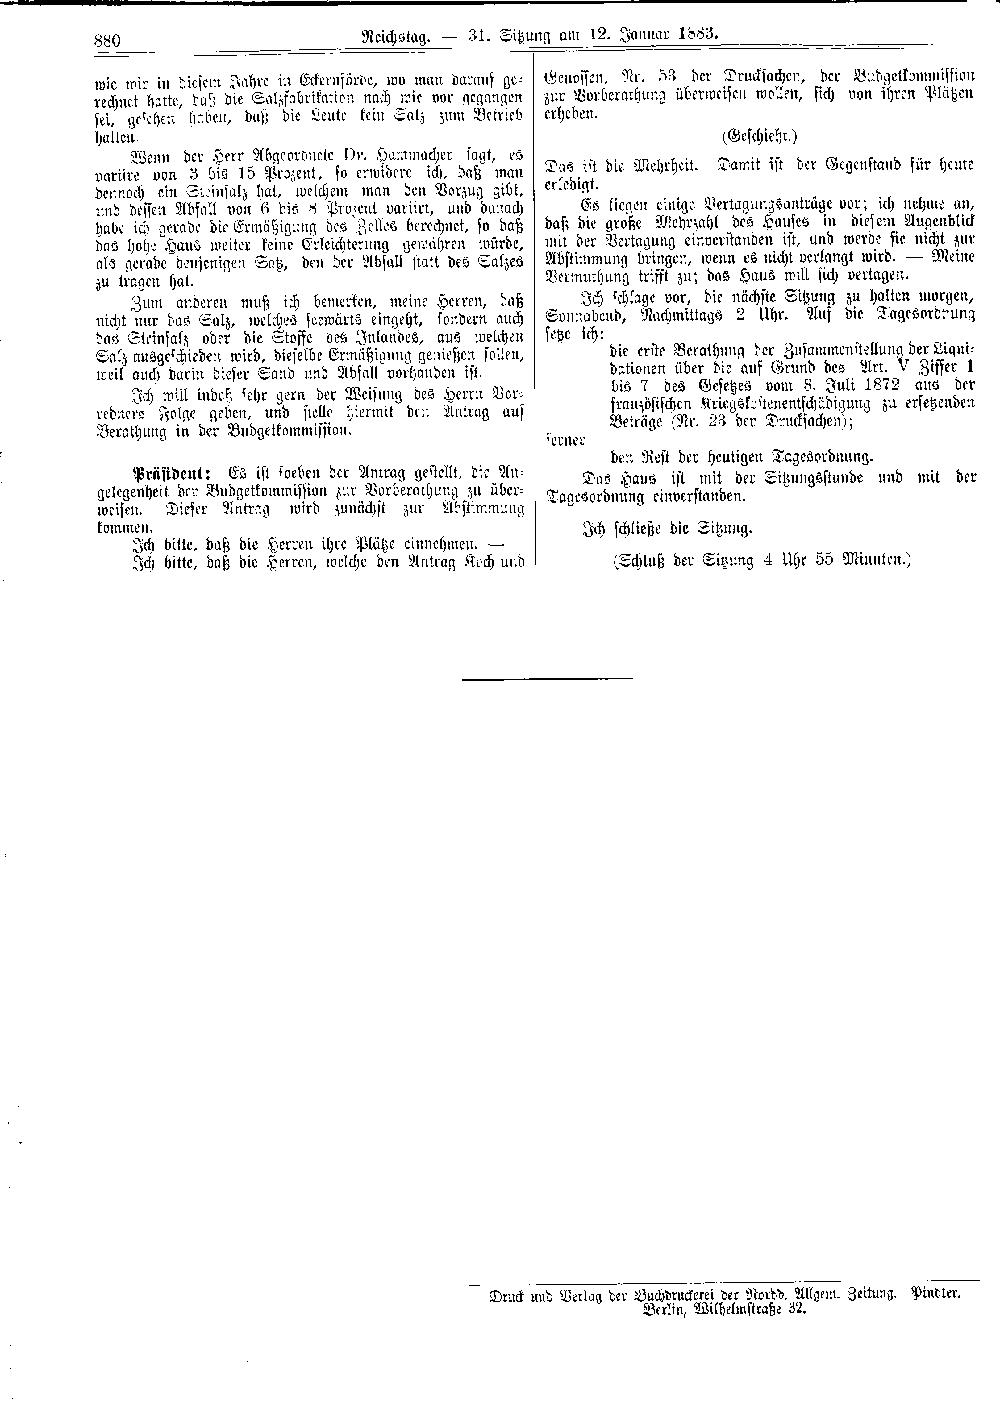 Scan of page 880